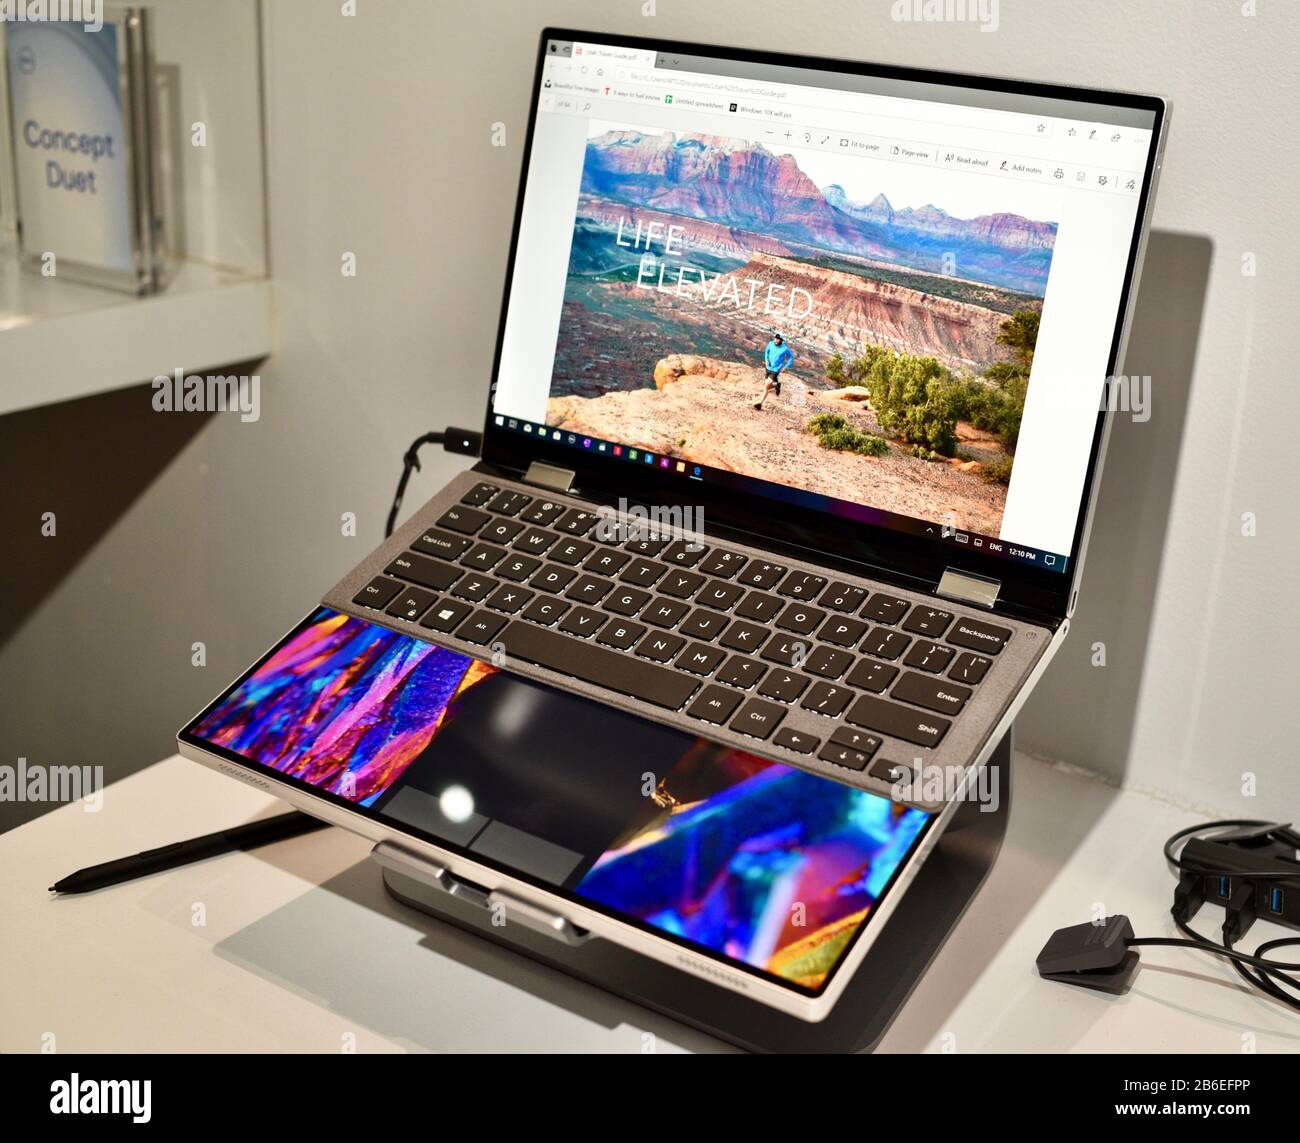 Dell Computer Concept (pre-market) Duet, a two display, folding PC with keyboard accessory, on display at Dell Experience at CES, Las Vegas, NV, USA Stock Photo